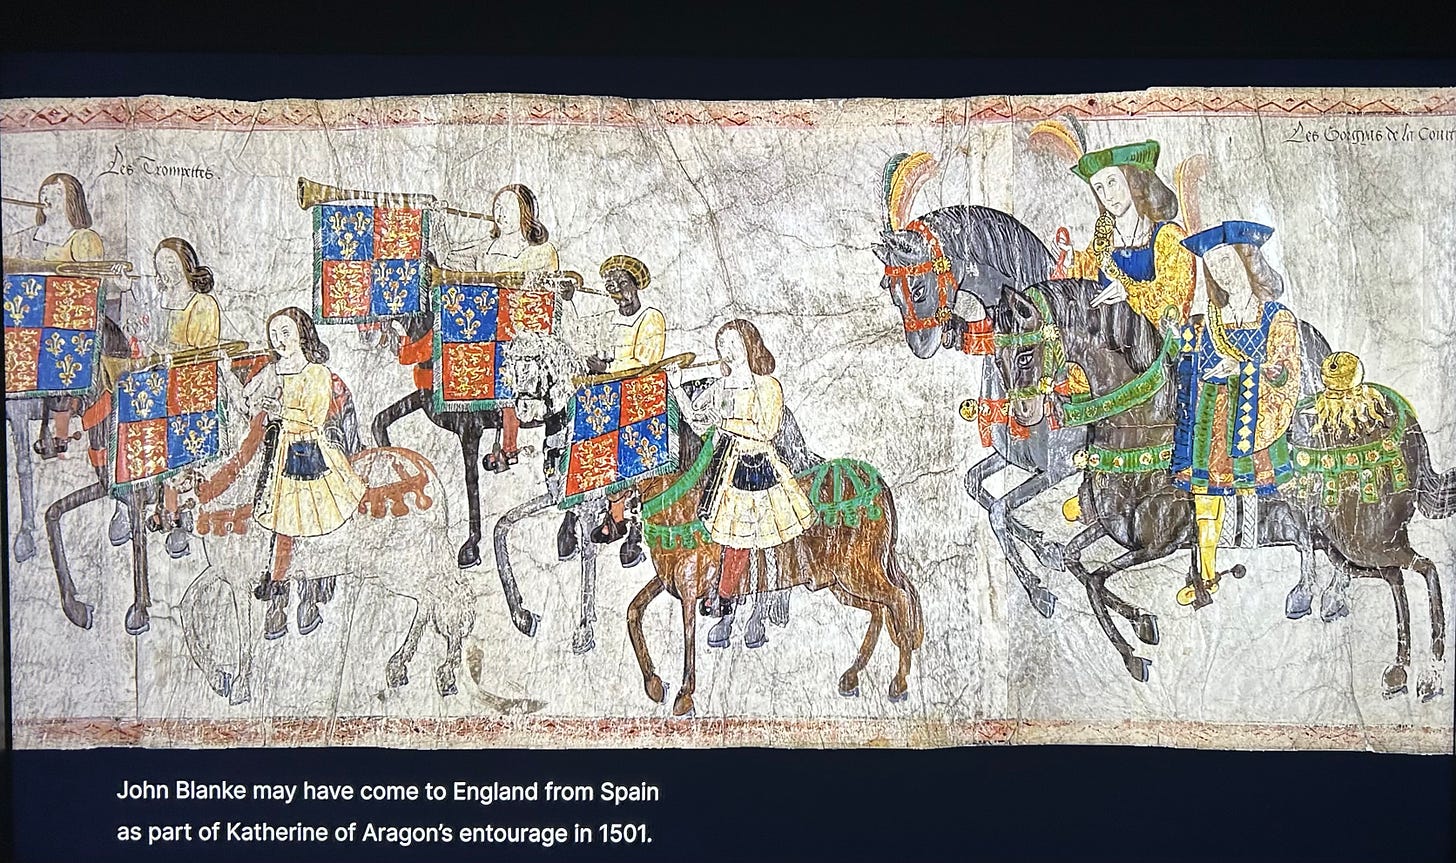 An extract from a long roll showing 8 men on horseback. 6 are trumpeters, and one has been identified as the trumpeter John Blanke.